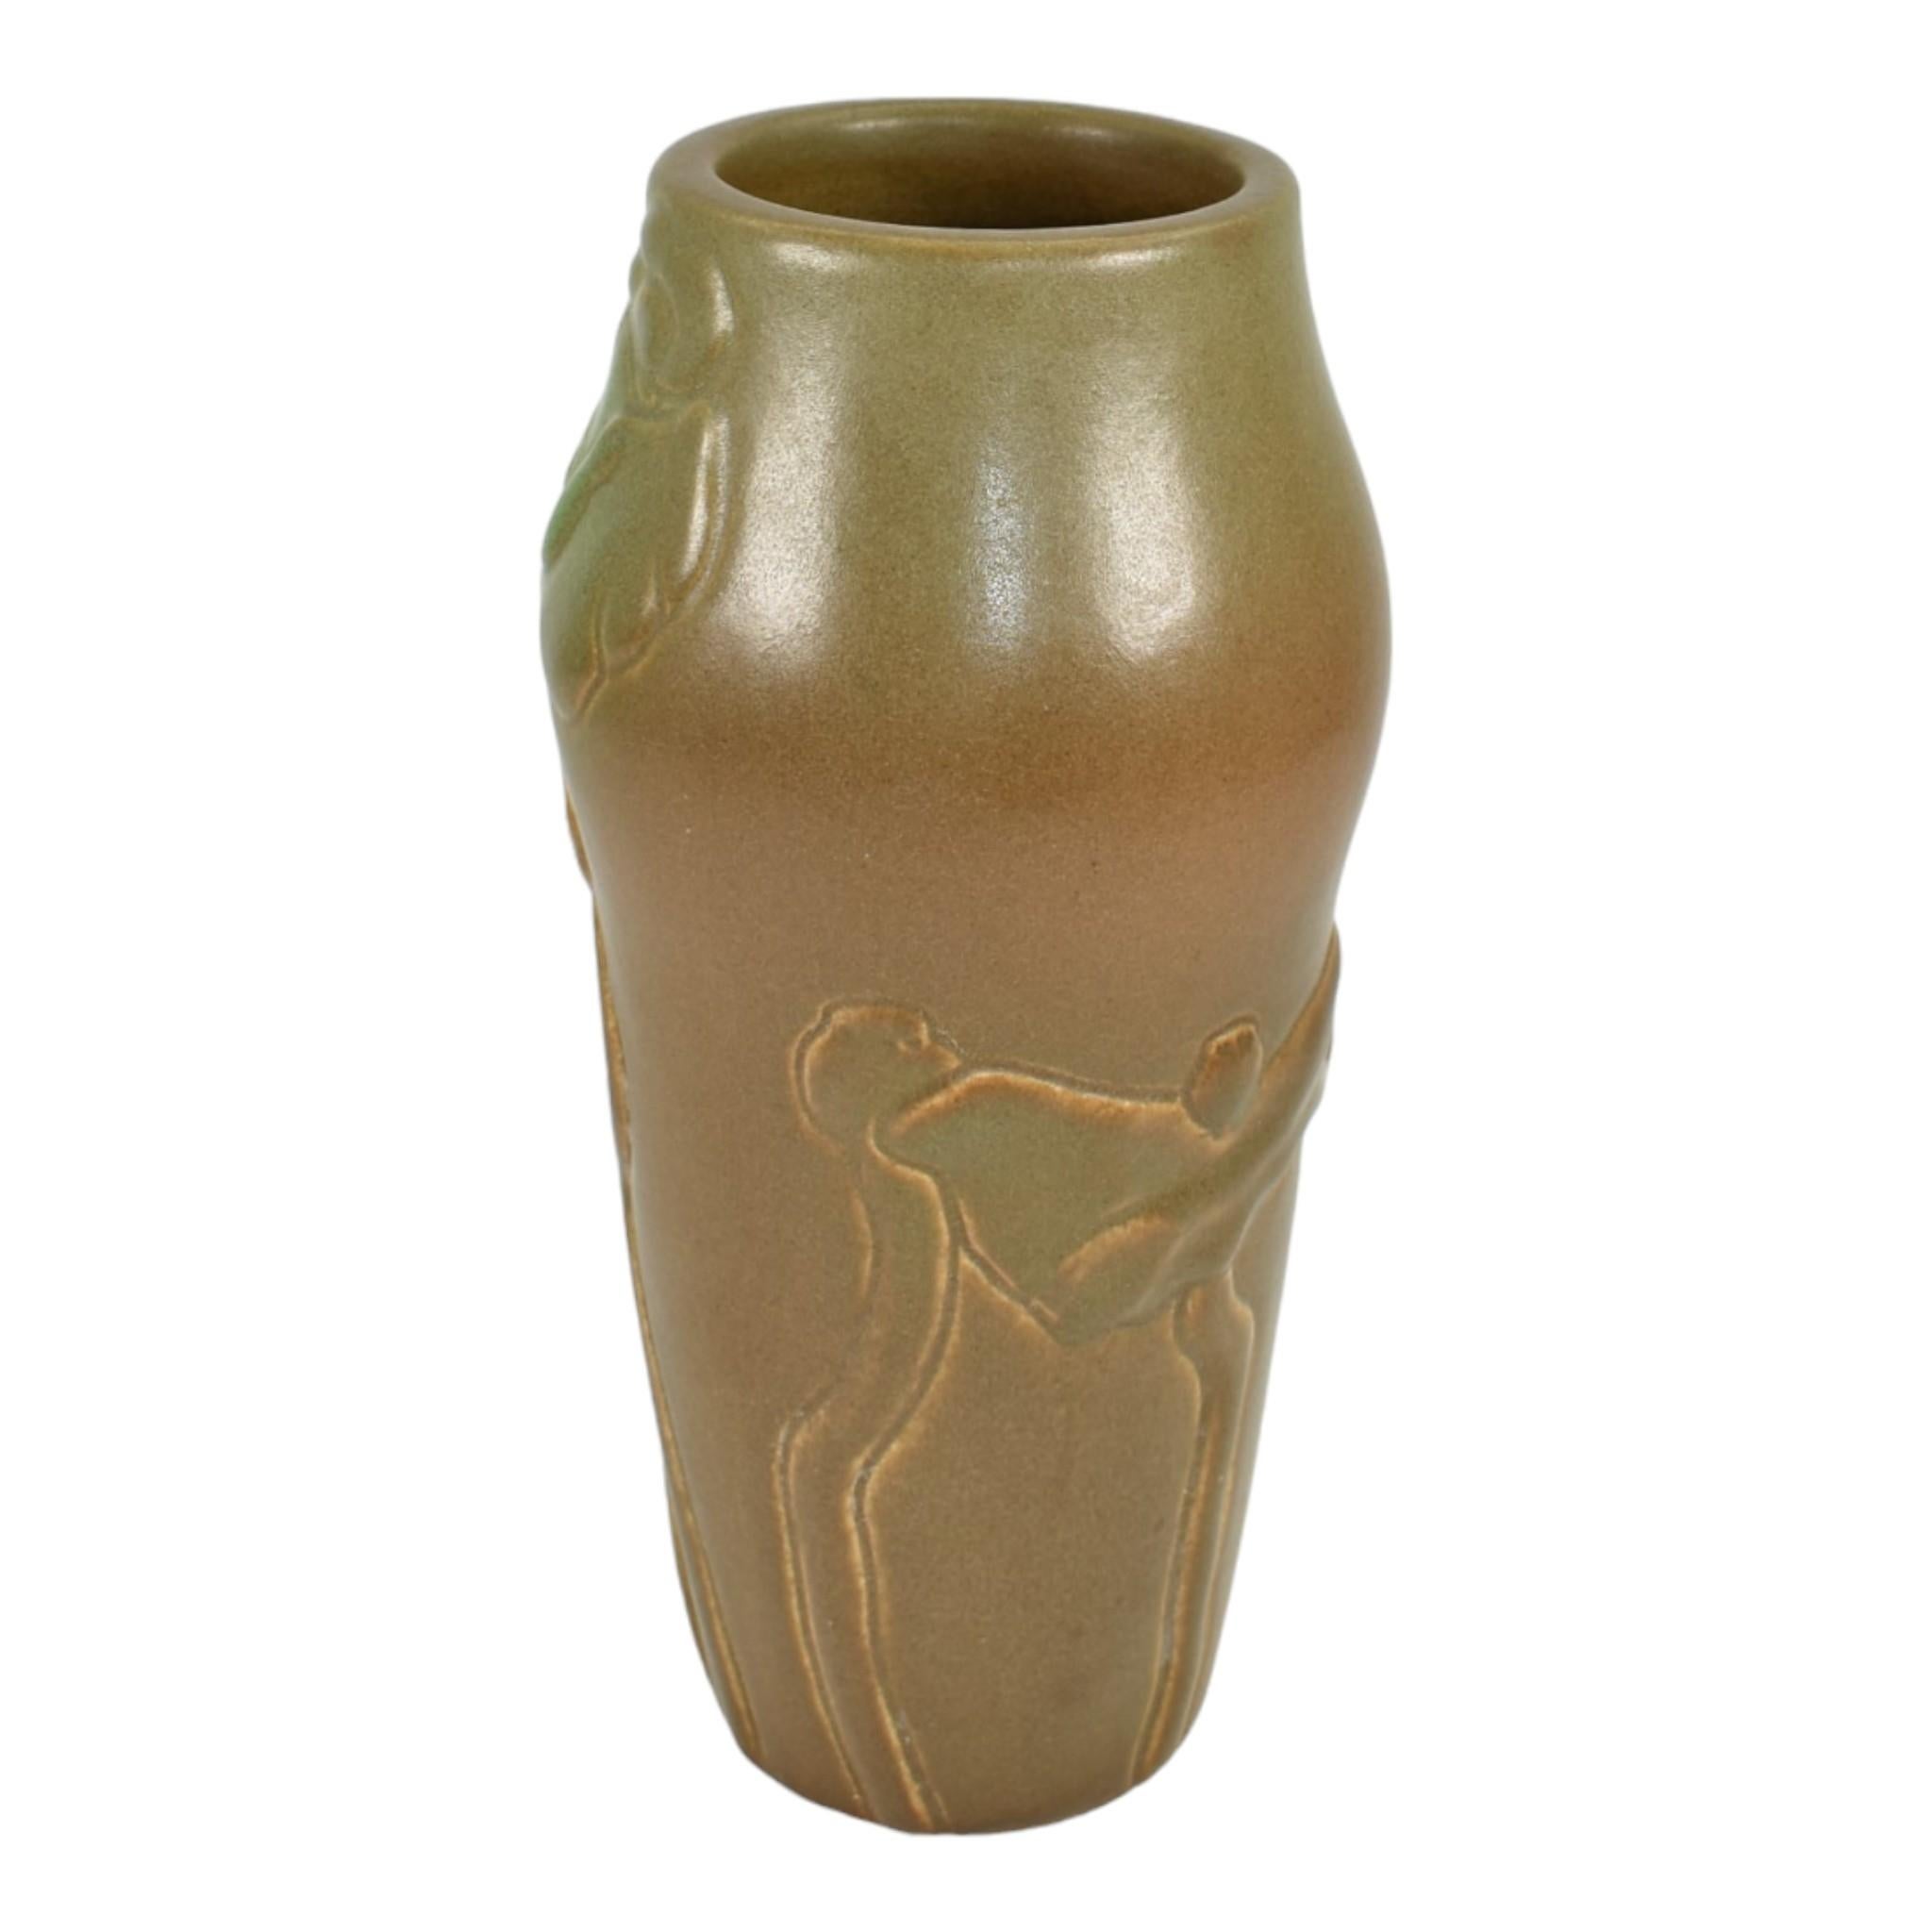 Van Briggle 1902 Vintage Arts And Crafts Pottery Brown Poppies Ceramic Vase 2
Superior and early arts and crafts crafted vase in a wonderful Mountain Crag brown and green glaze.
Shows well with a short and tight hairline at the rim and a